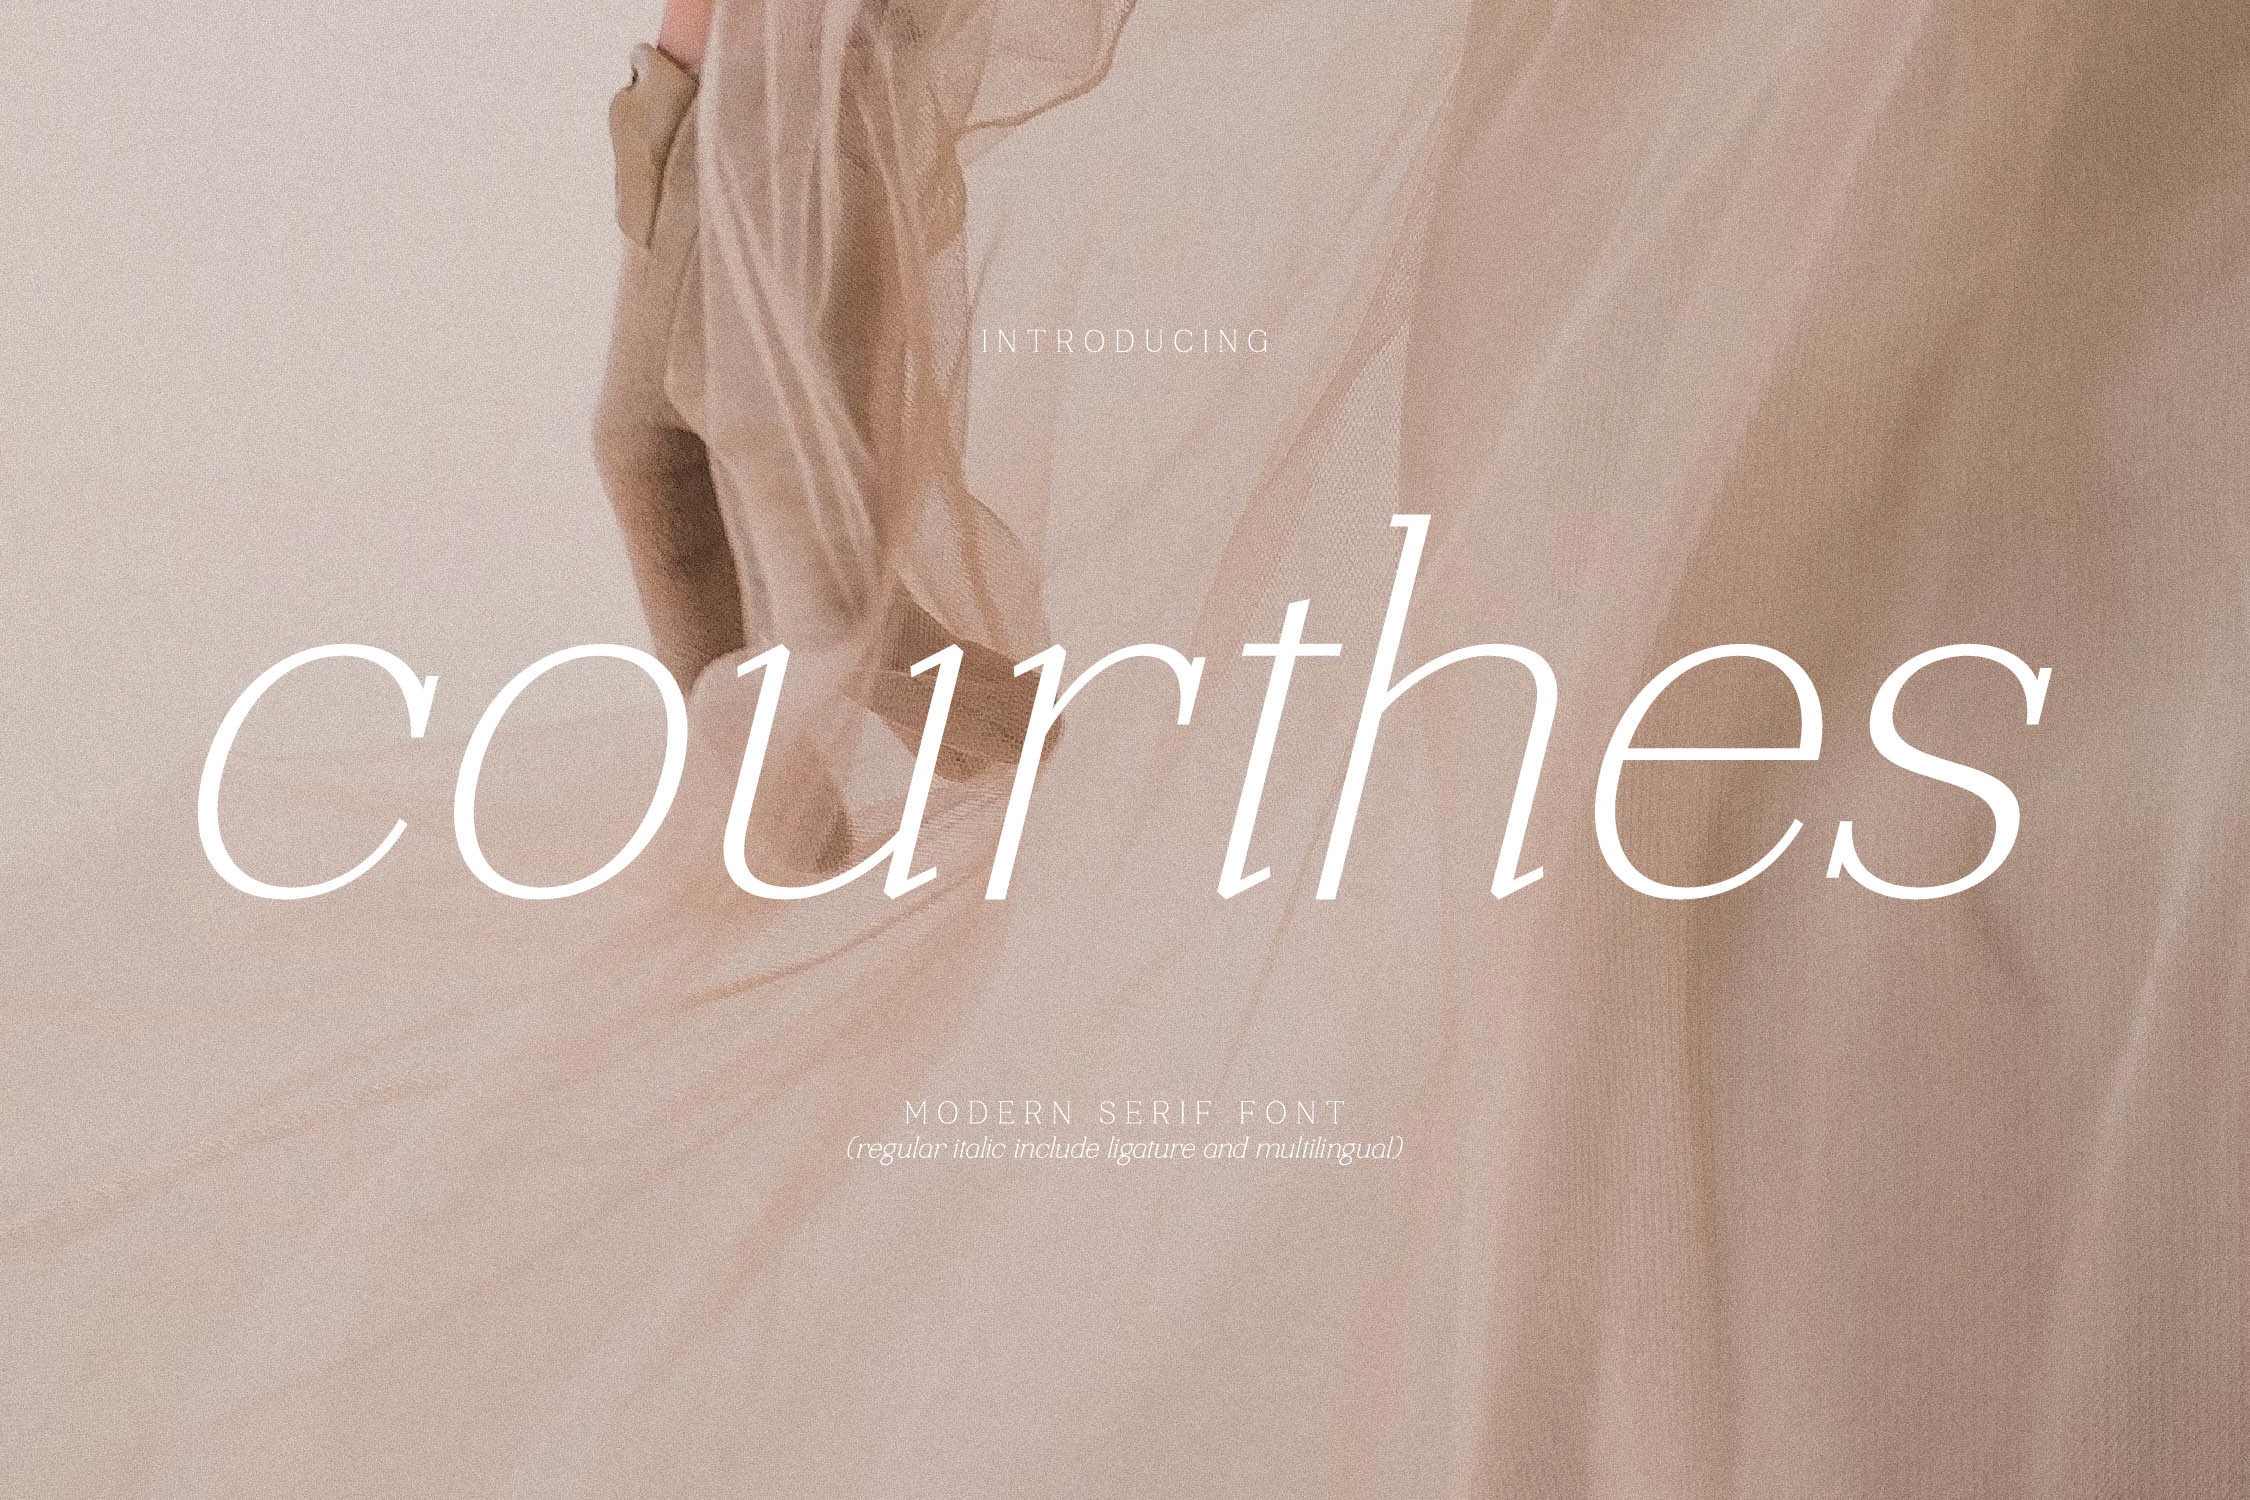 Font Courthes